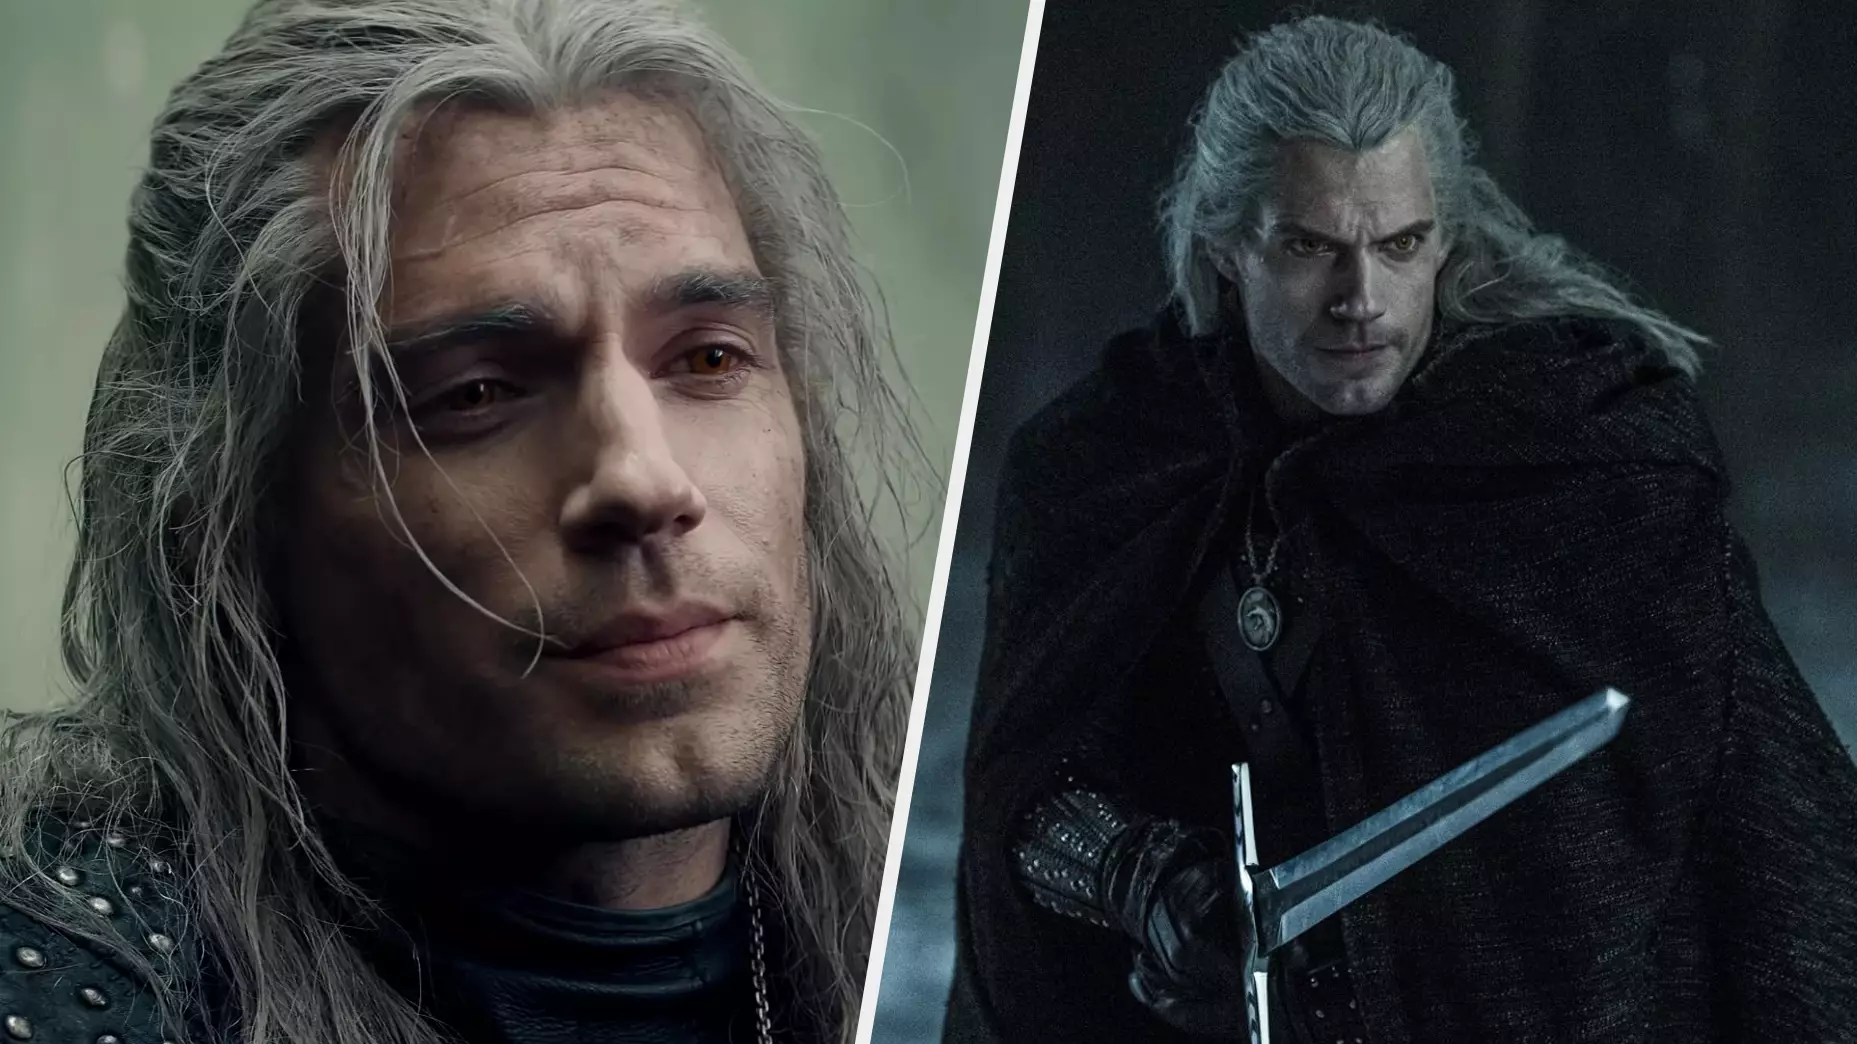 Filming Of 'The Witcher' Resumes After Henry Cavill Injured On Set